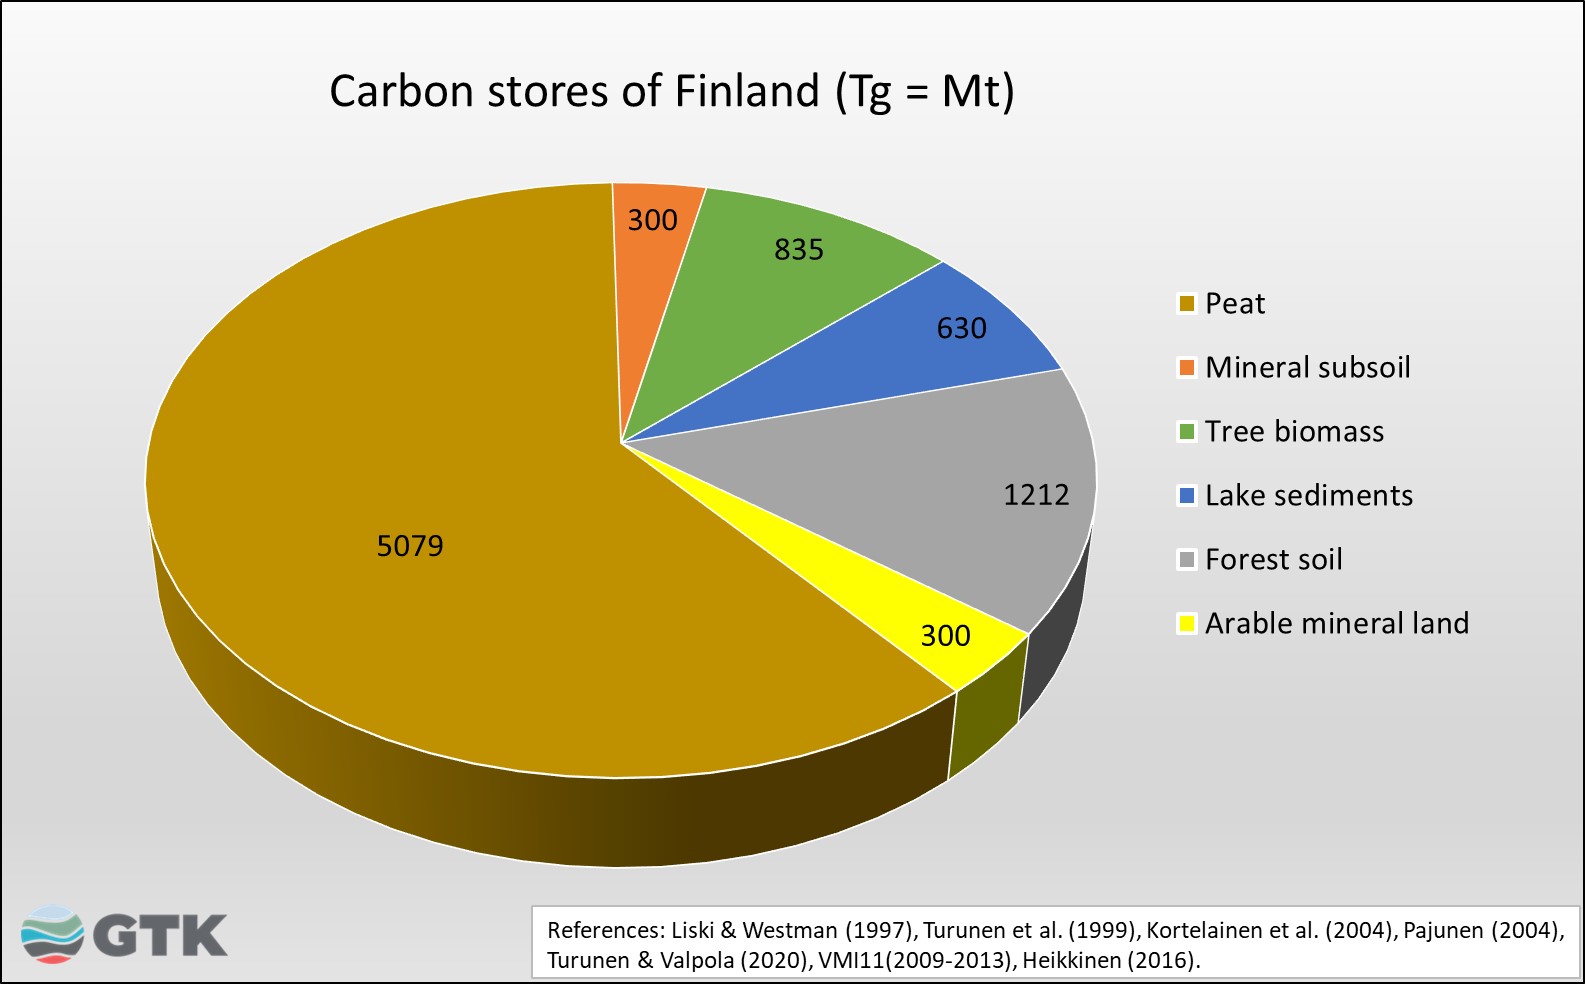 Figure 4. The carbon stores of Finland in 2015.